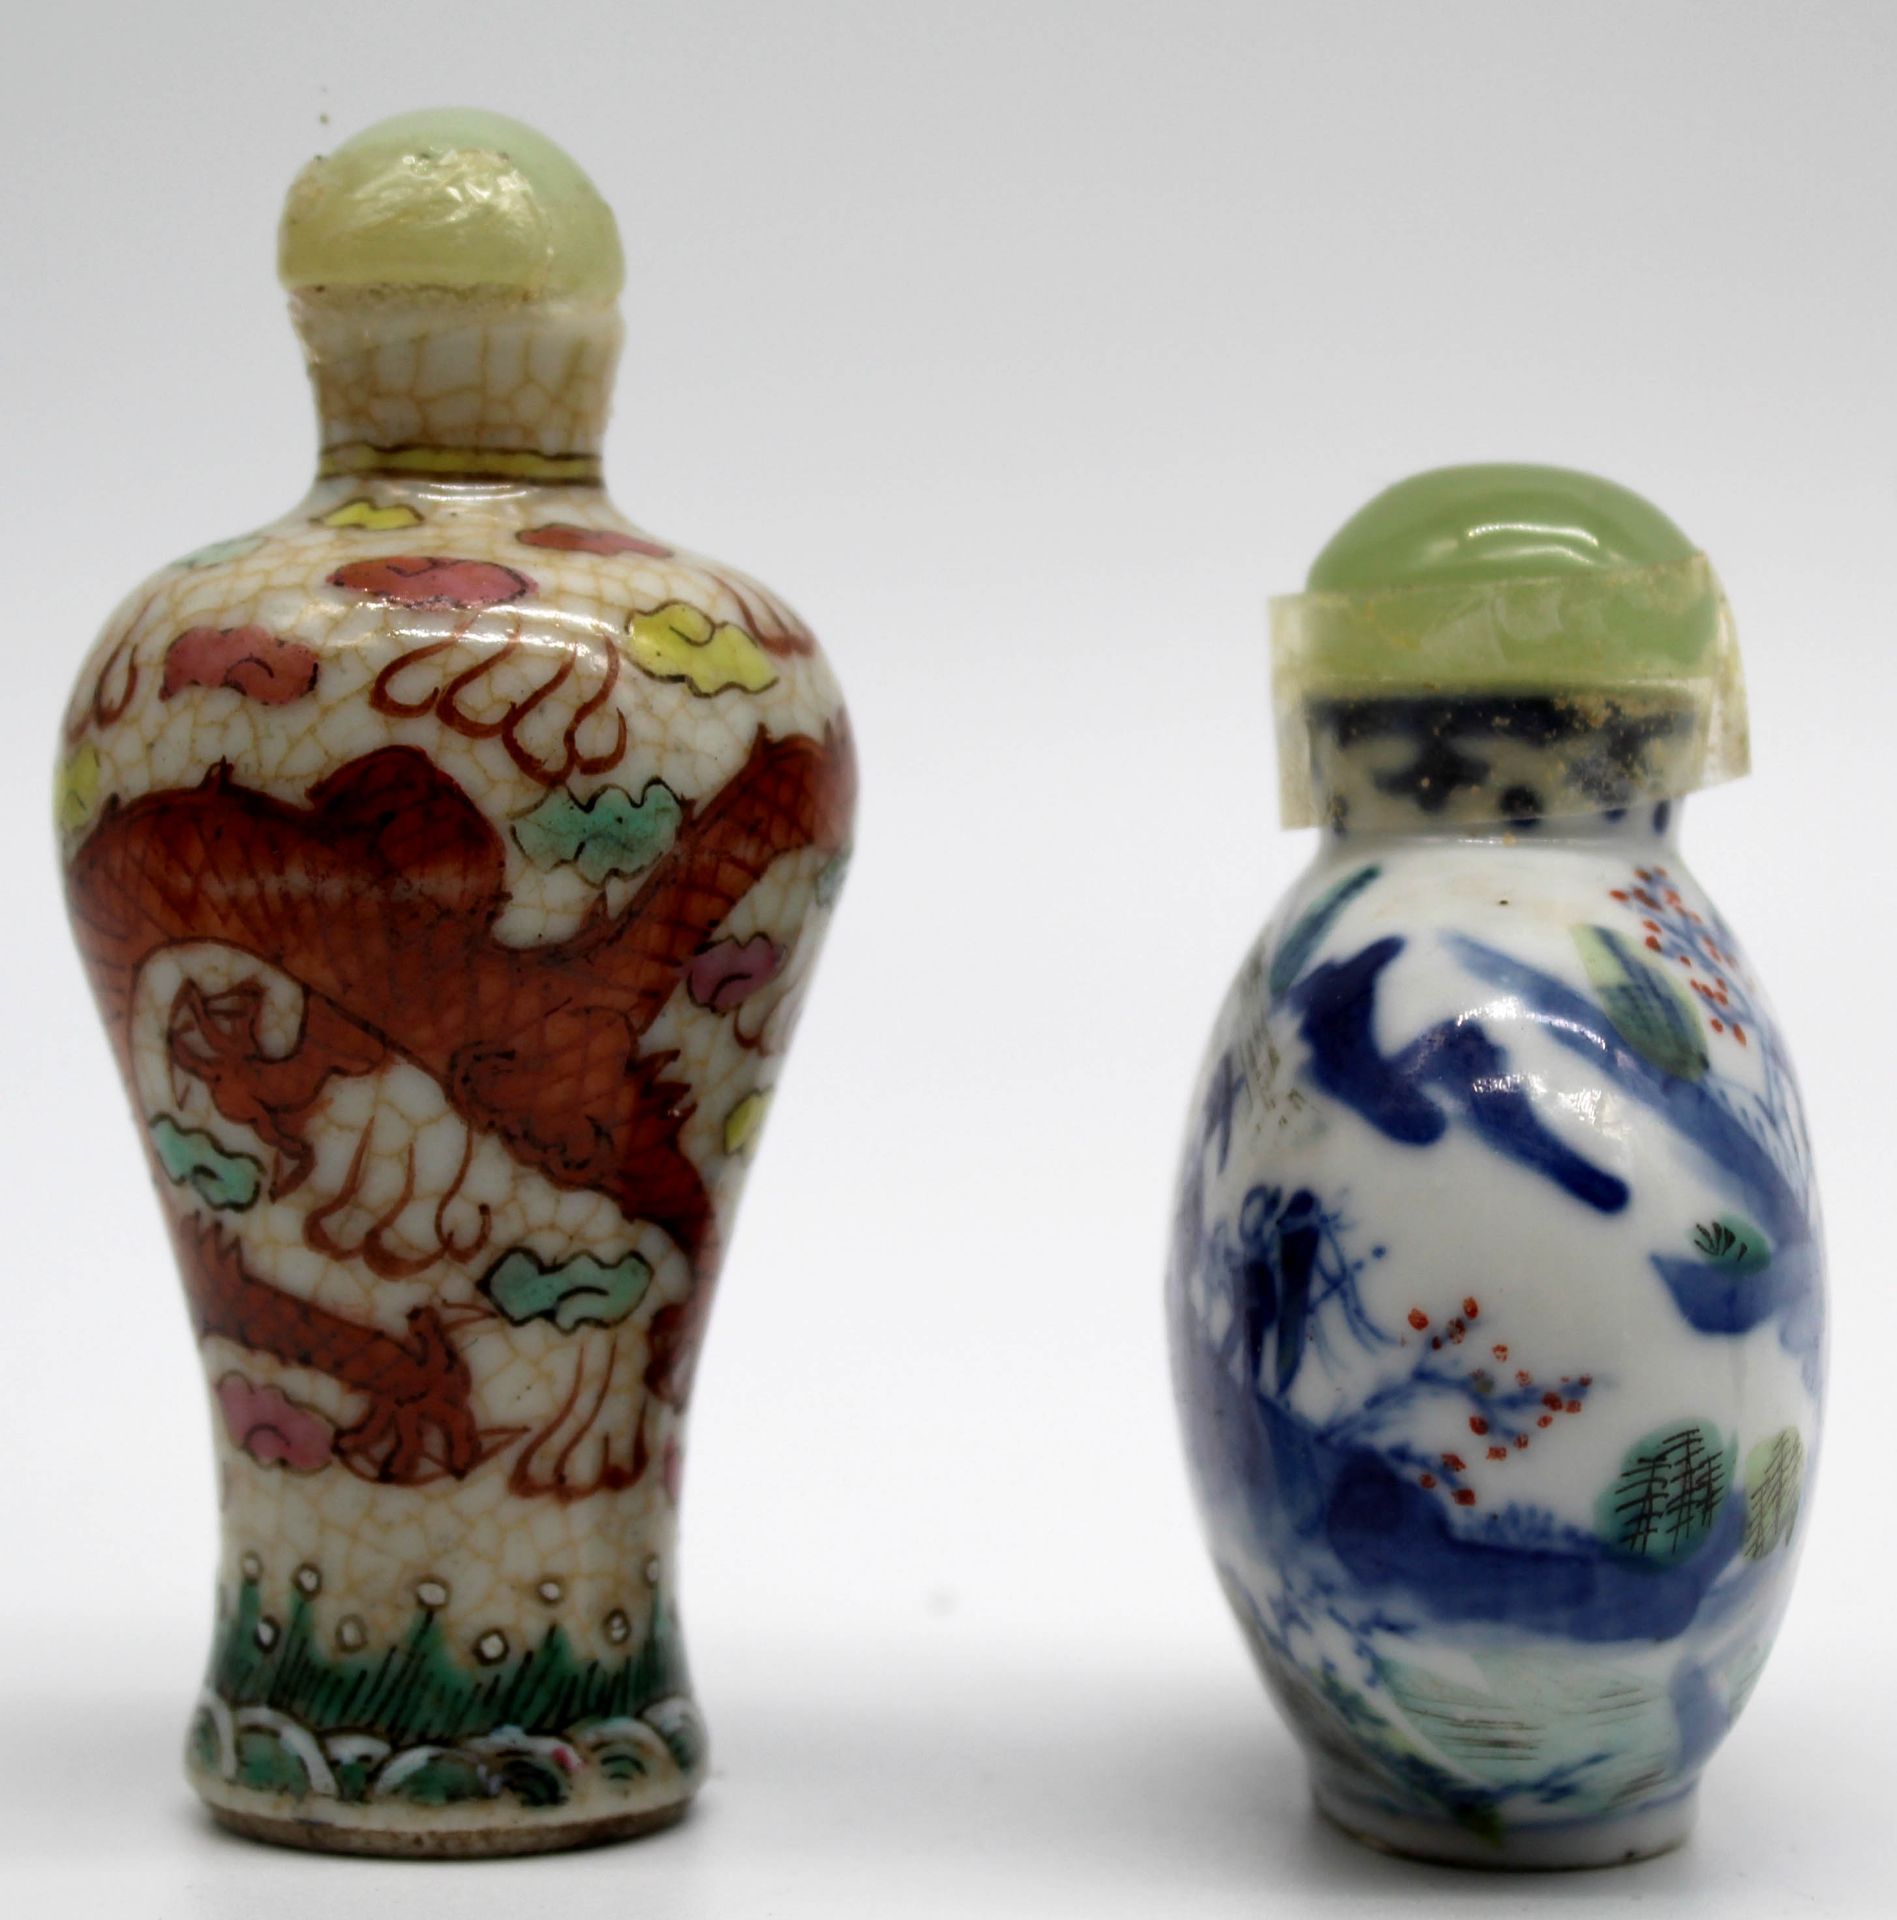 10 porcelain snuff bottles / dispeners. Probably China old. - Image 31 of 31